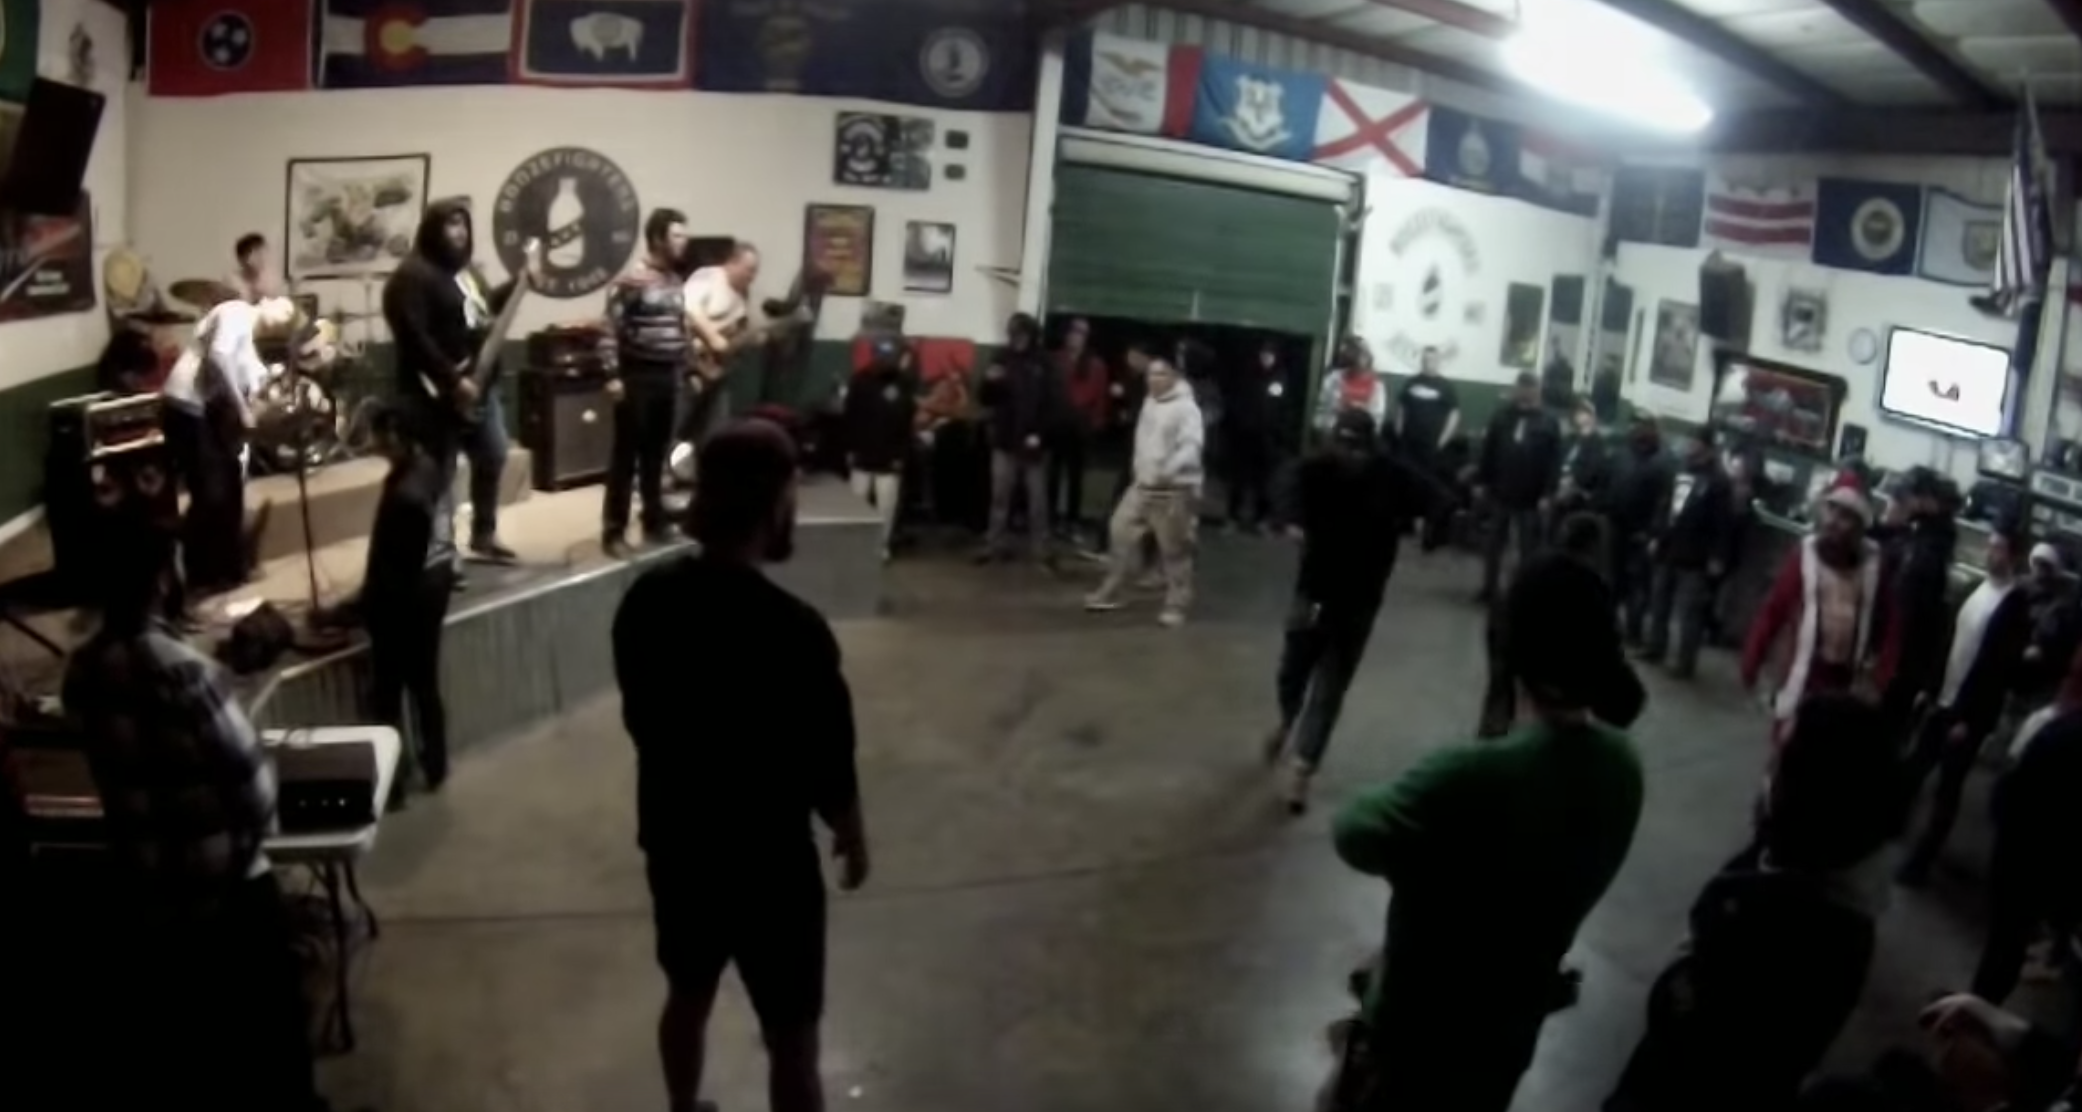 Watch Smack d Up singer get smacked up by Santa Claus Metal Insider